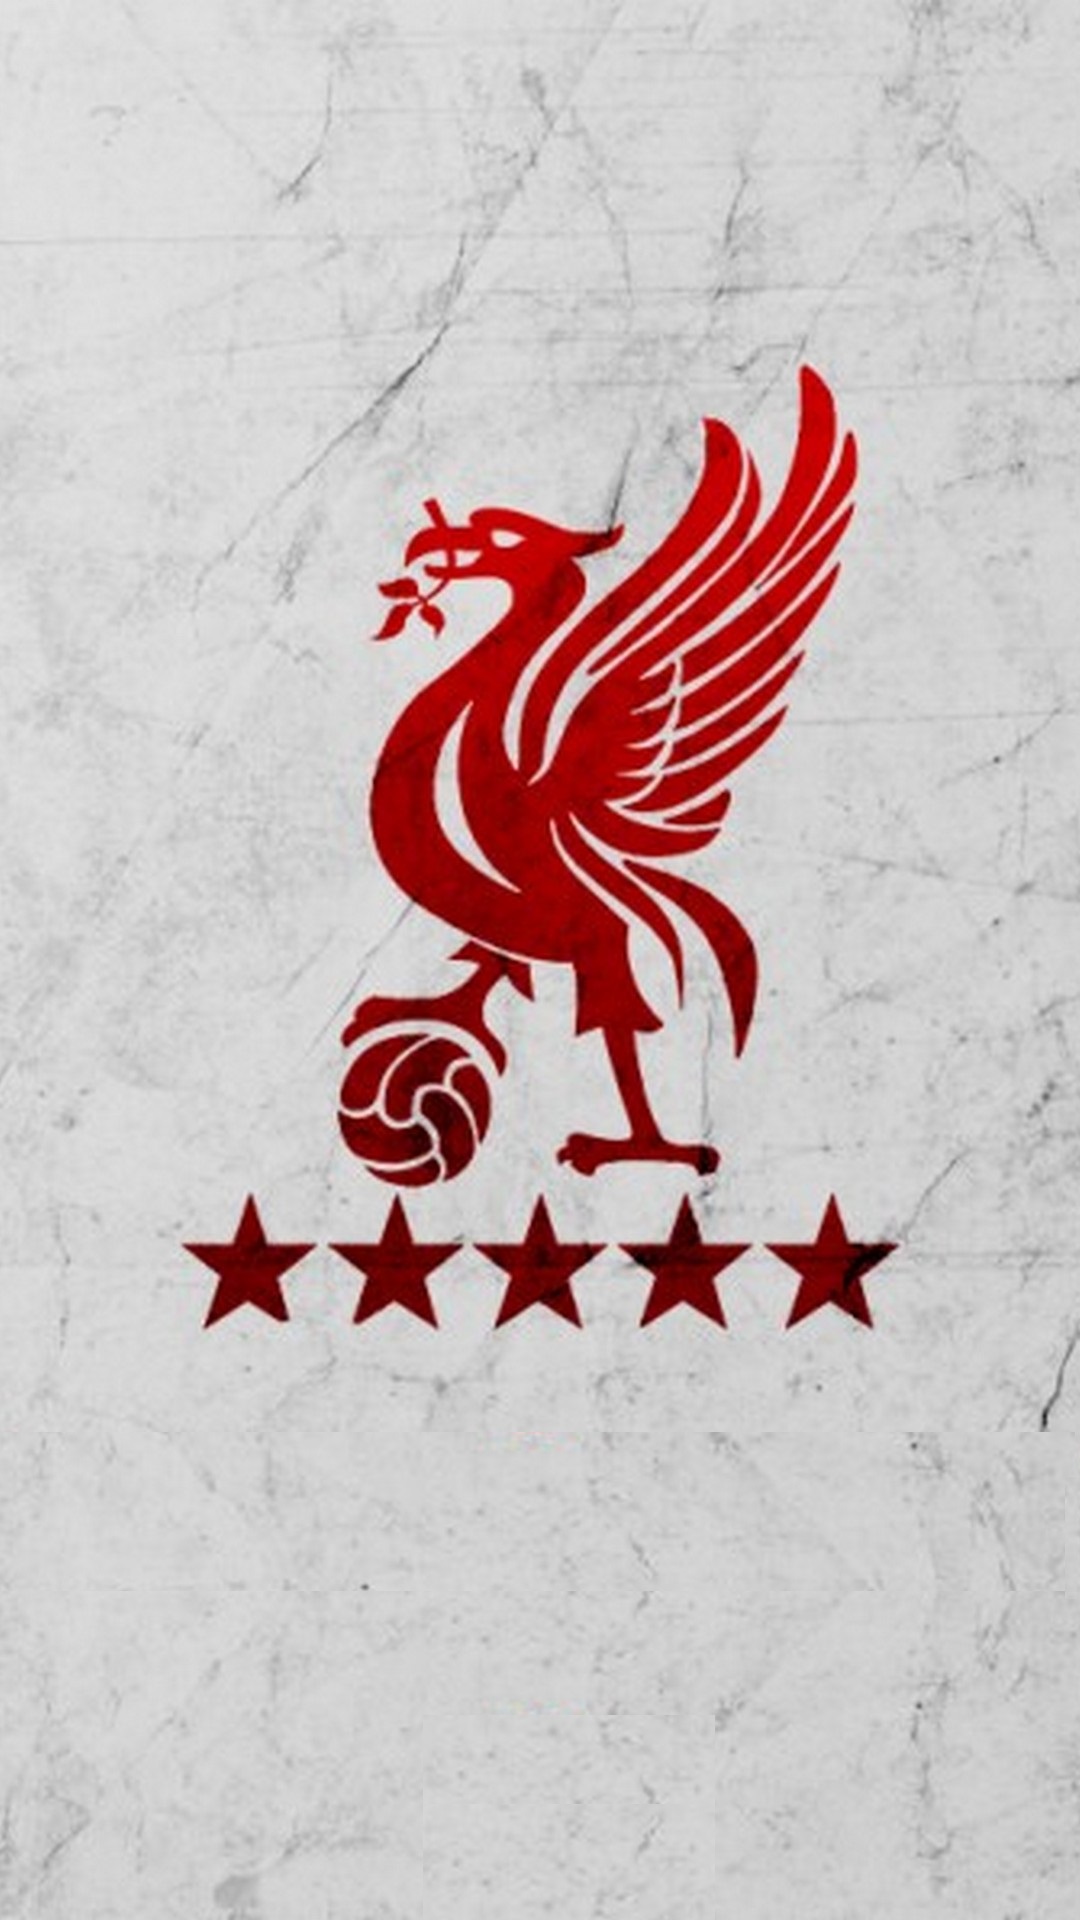 Liverpool Wallpaper For Phone HD with high-resolution 1080x1920 pixel. Download all Mobile Wallpapers and Use them as wallpapers for your iPhone, Tablet, iPad, Android and other mobile devices